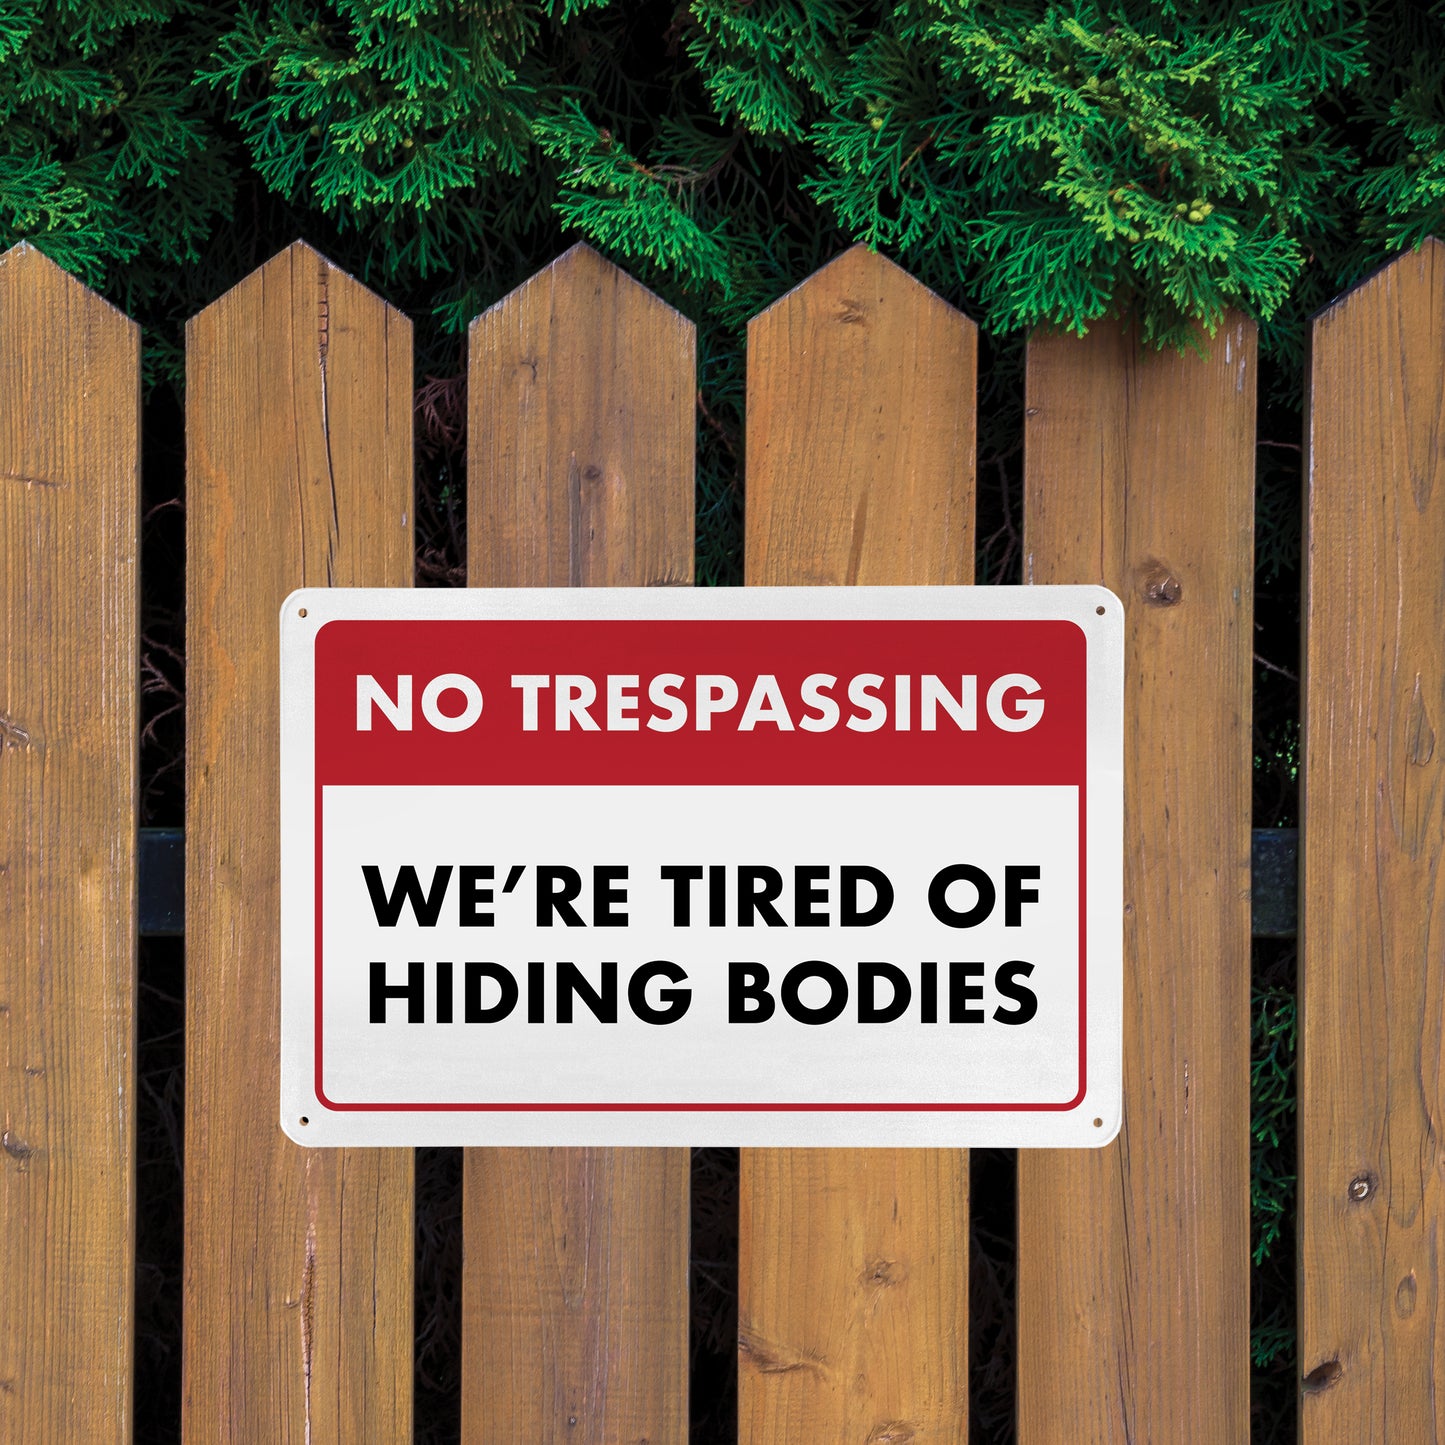 No Trespassing - We're Tired of Hiding Bodies - 8" x 12" Funny Metal Sign